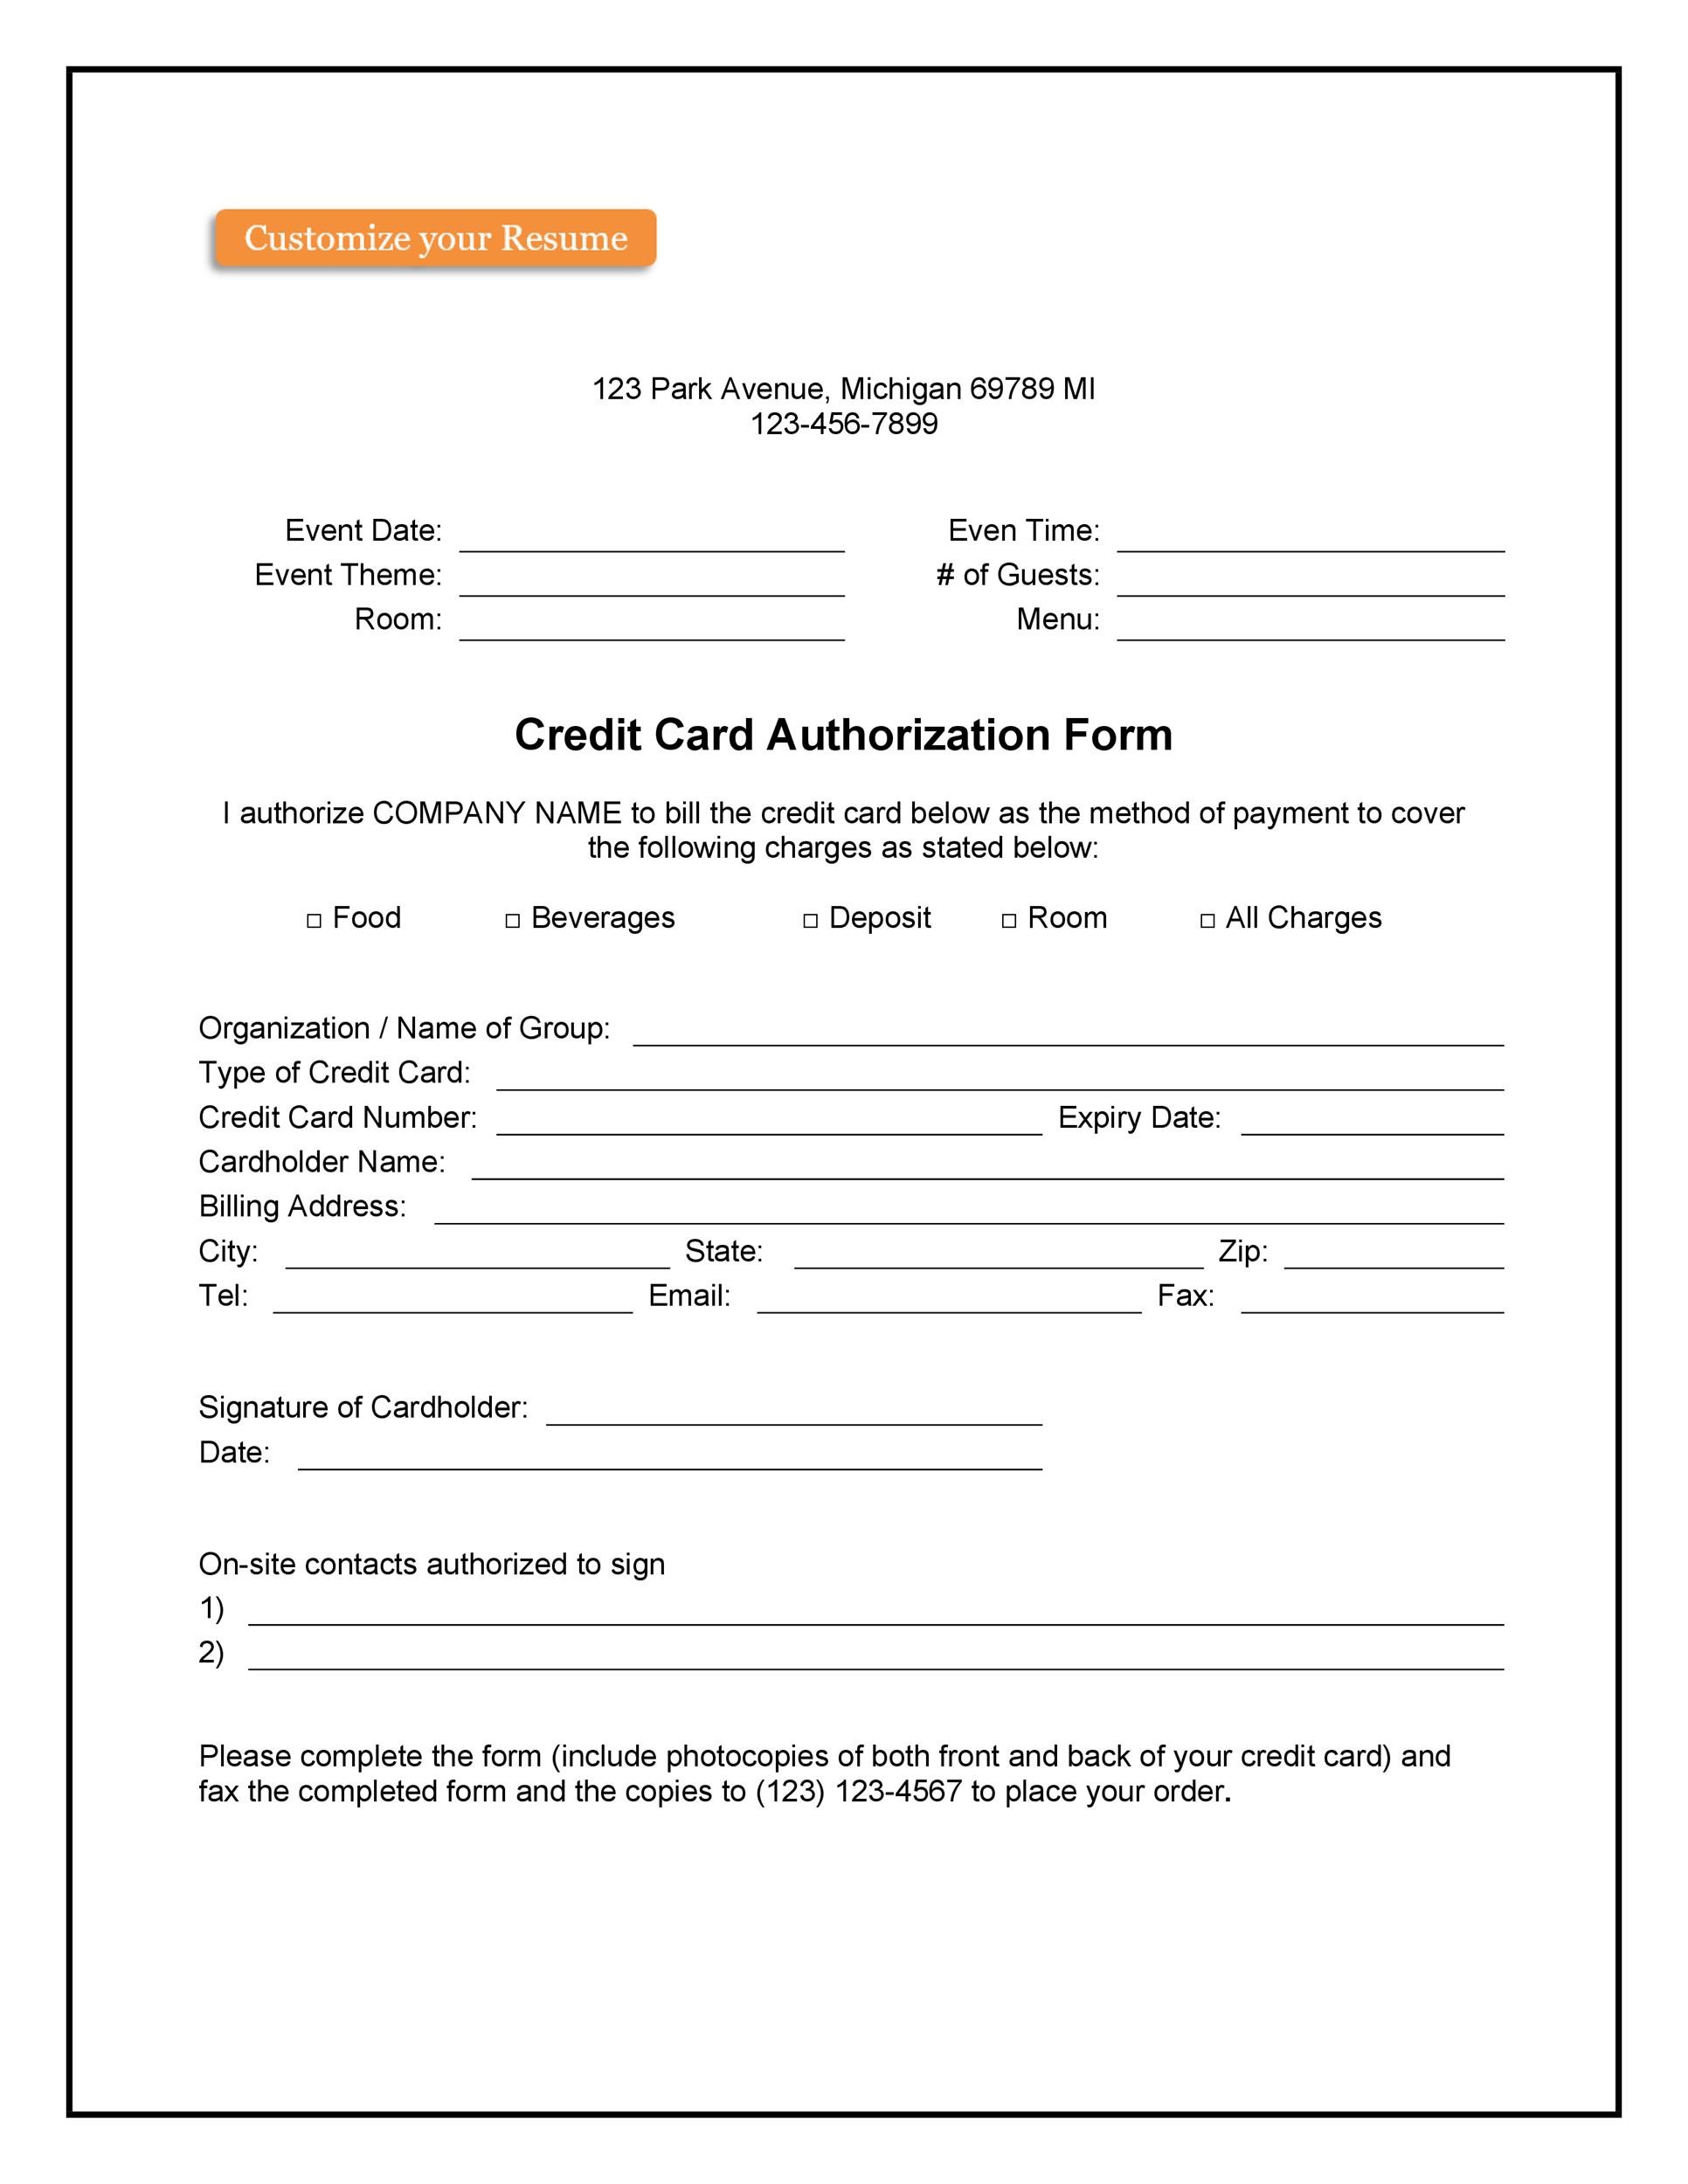 41-credit-card-authorization-forms-templates-ready-to-use